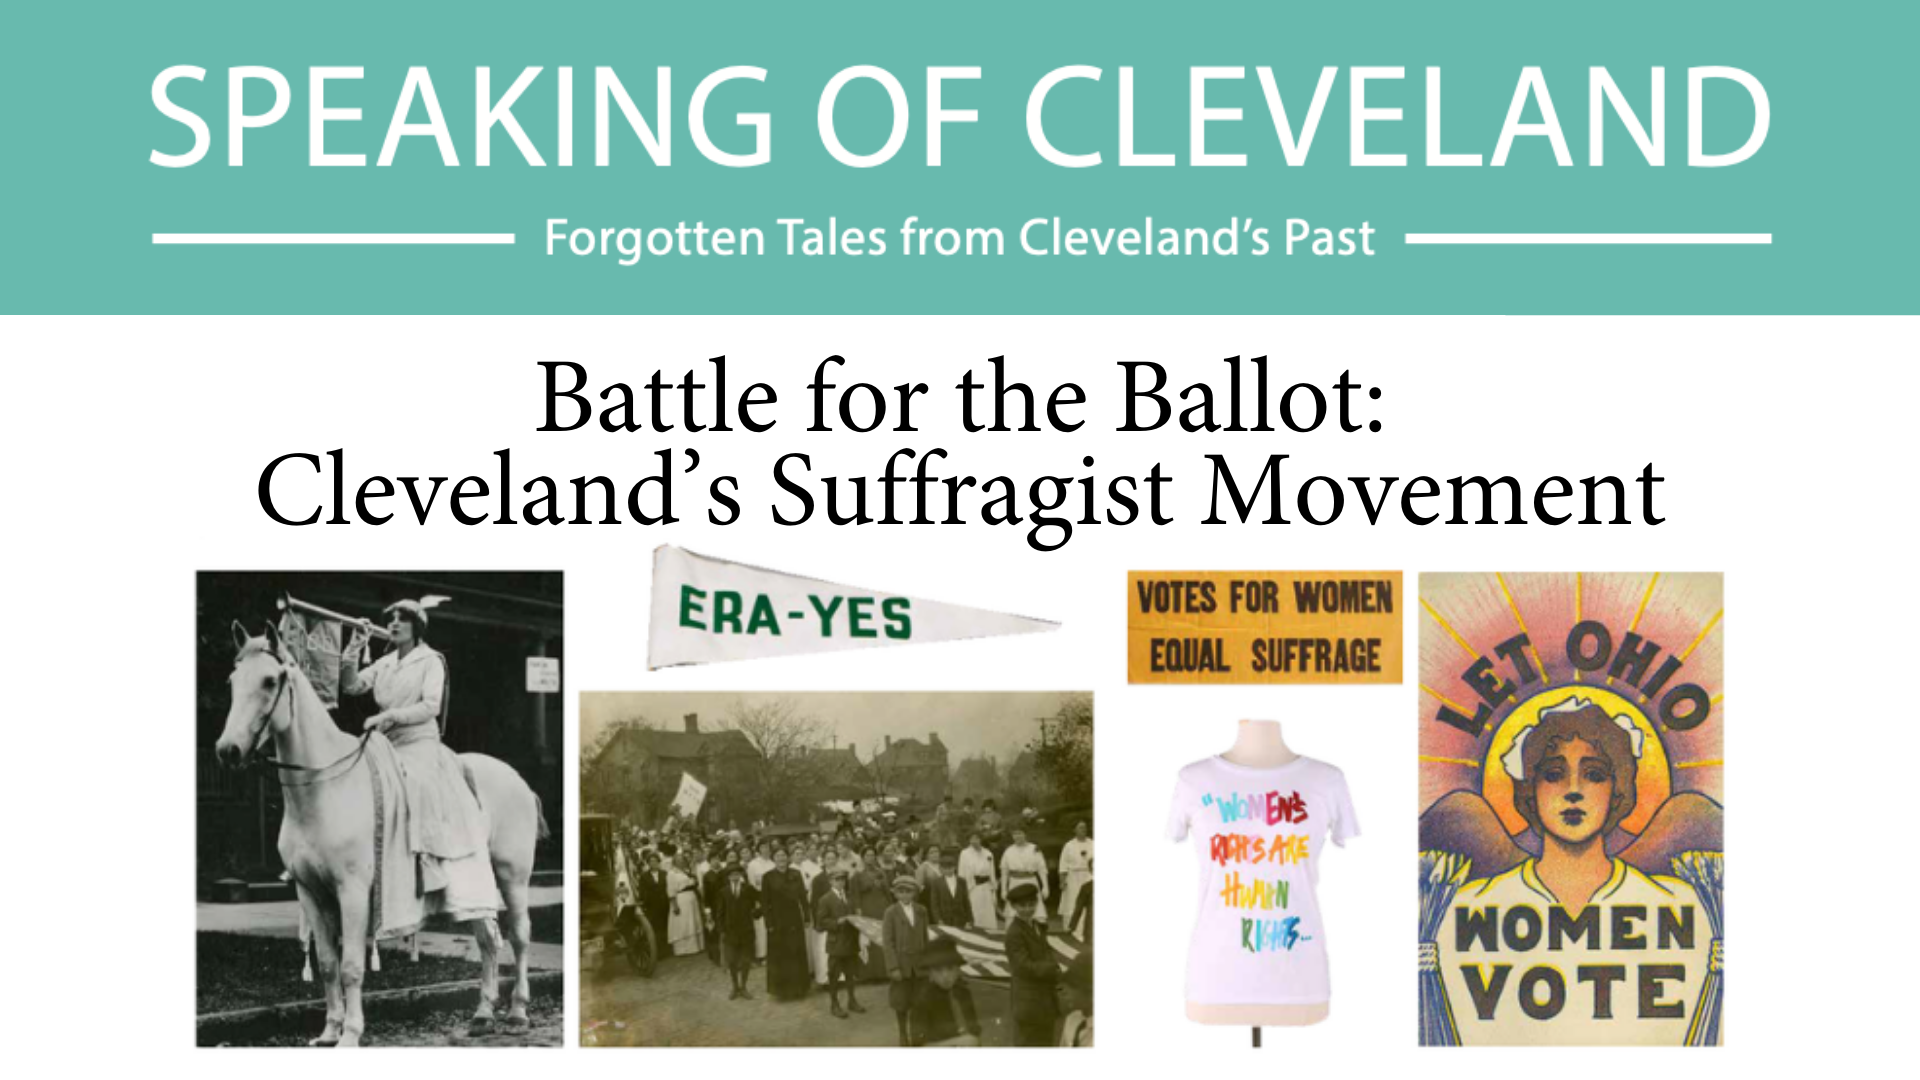 Cleveland's Suffrage Movement